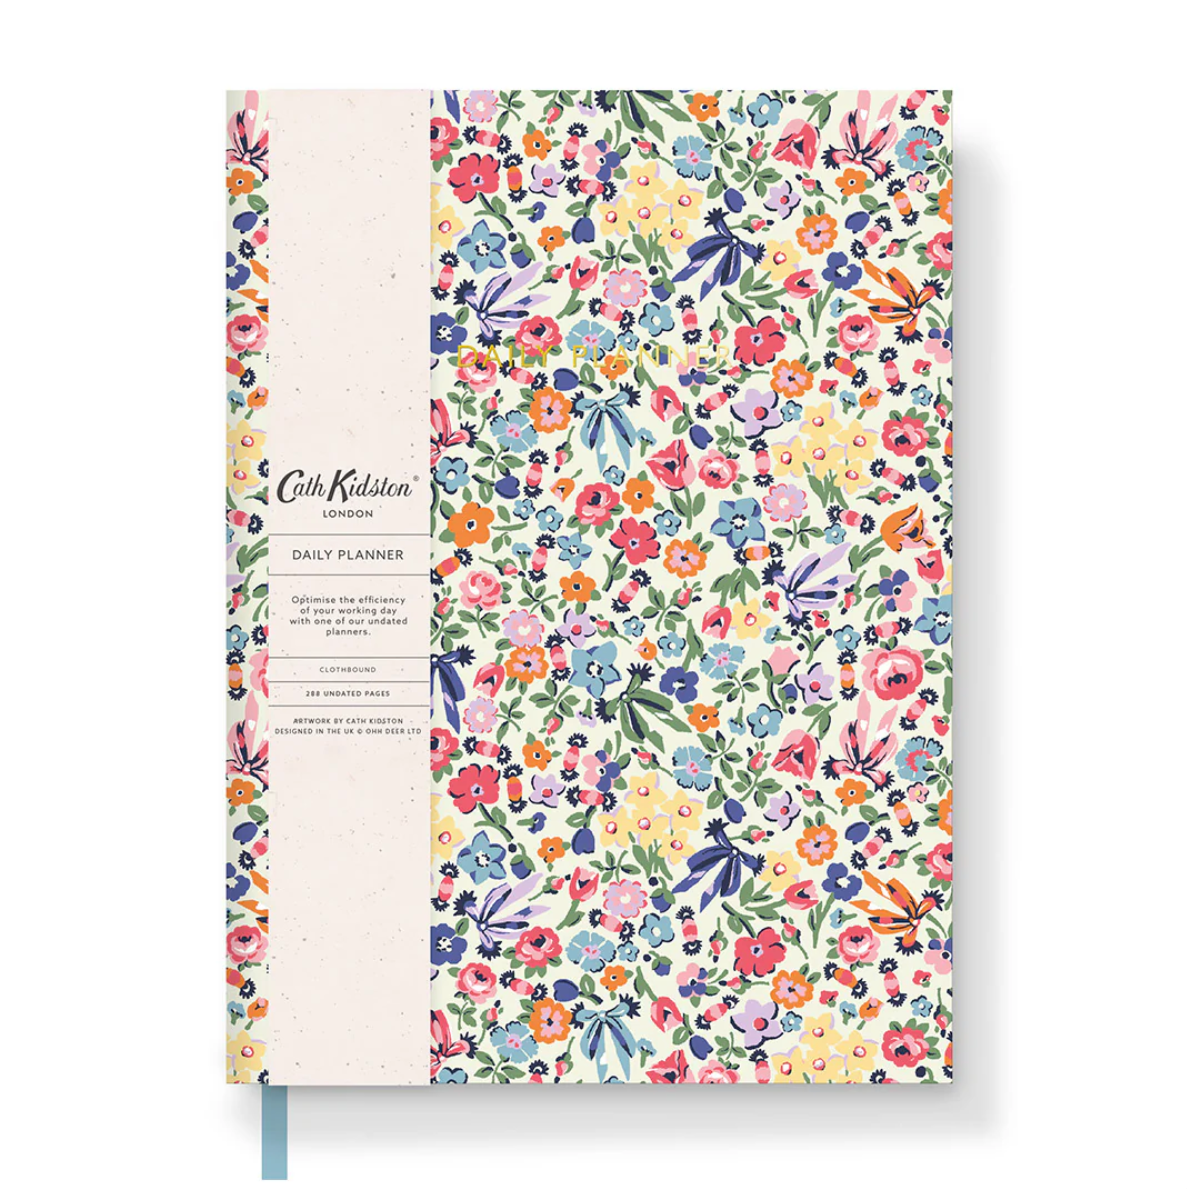 Ohh Deer Cath Kidston Daily Planner